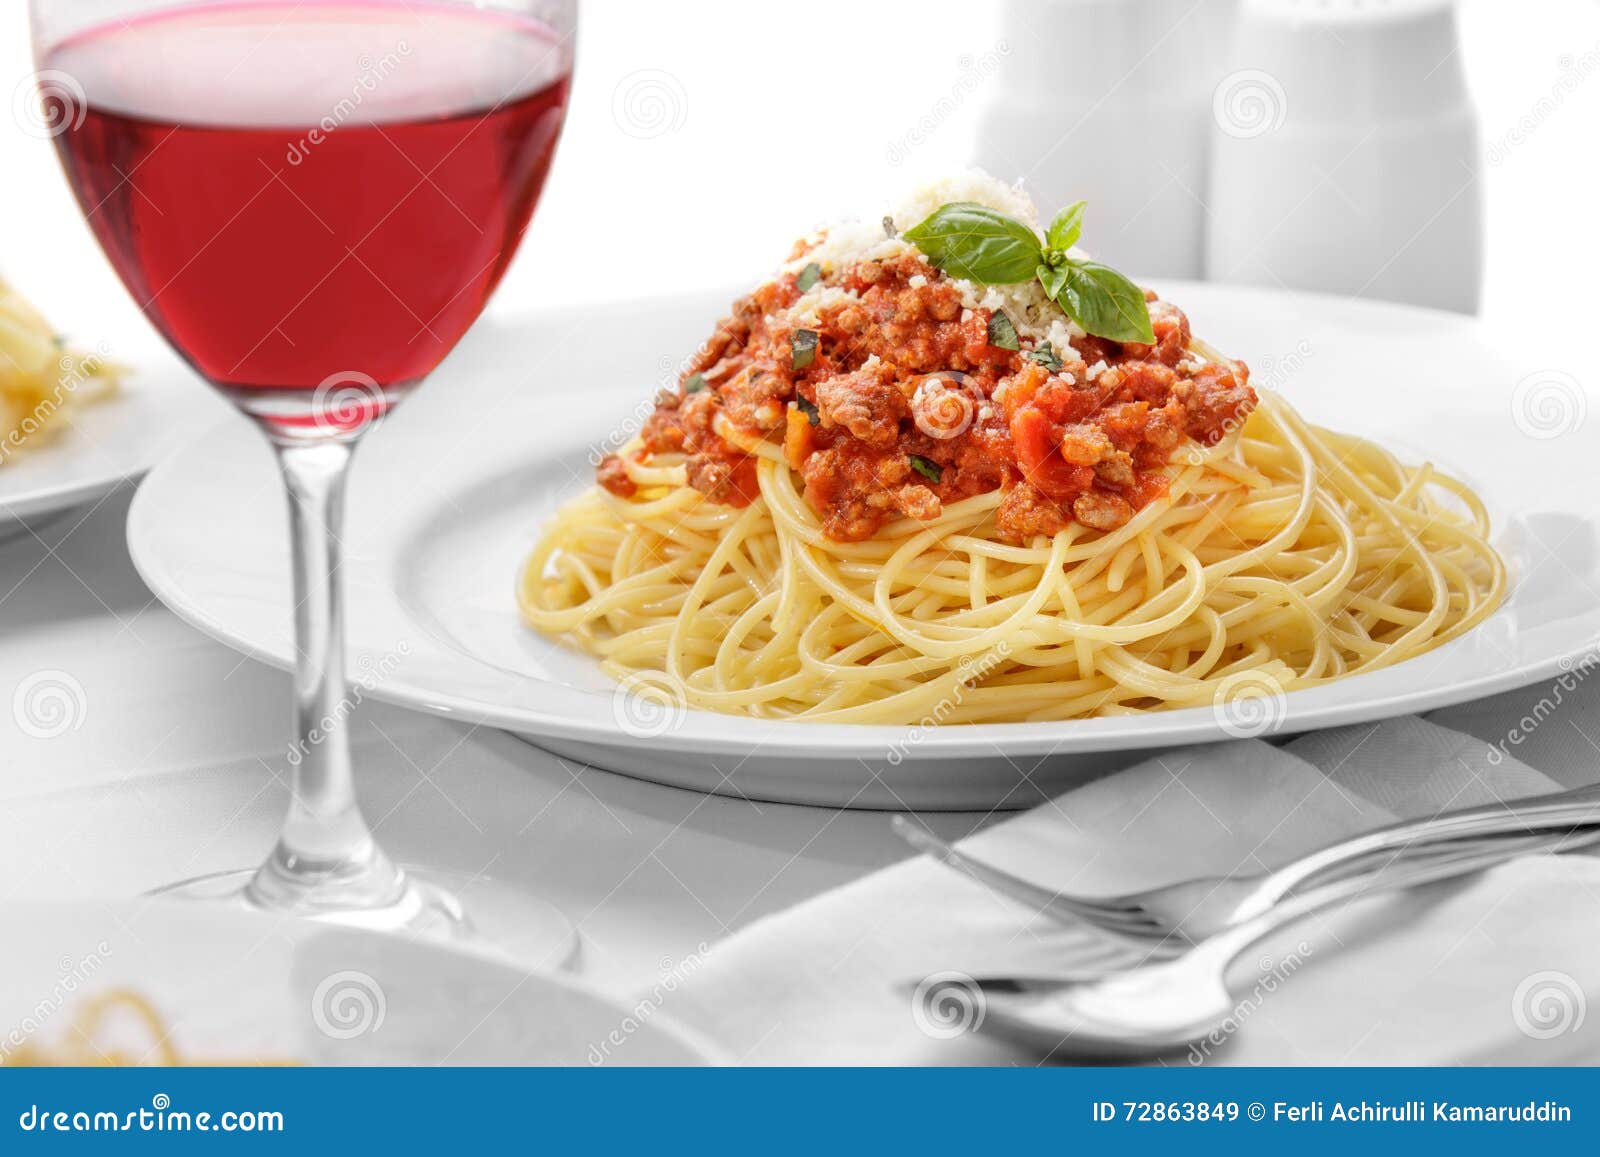 Italian Spaghetti Bolognese Served with a Glass Red Wine Stock Image - Image of dishes: 72863849